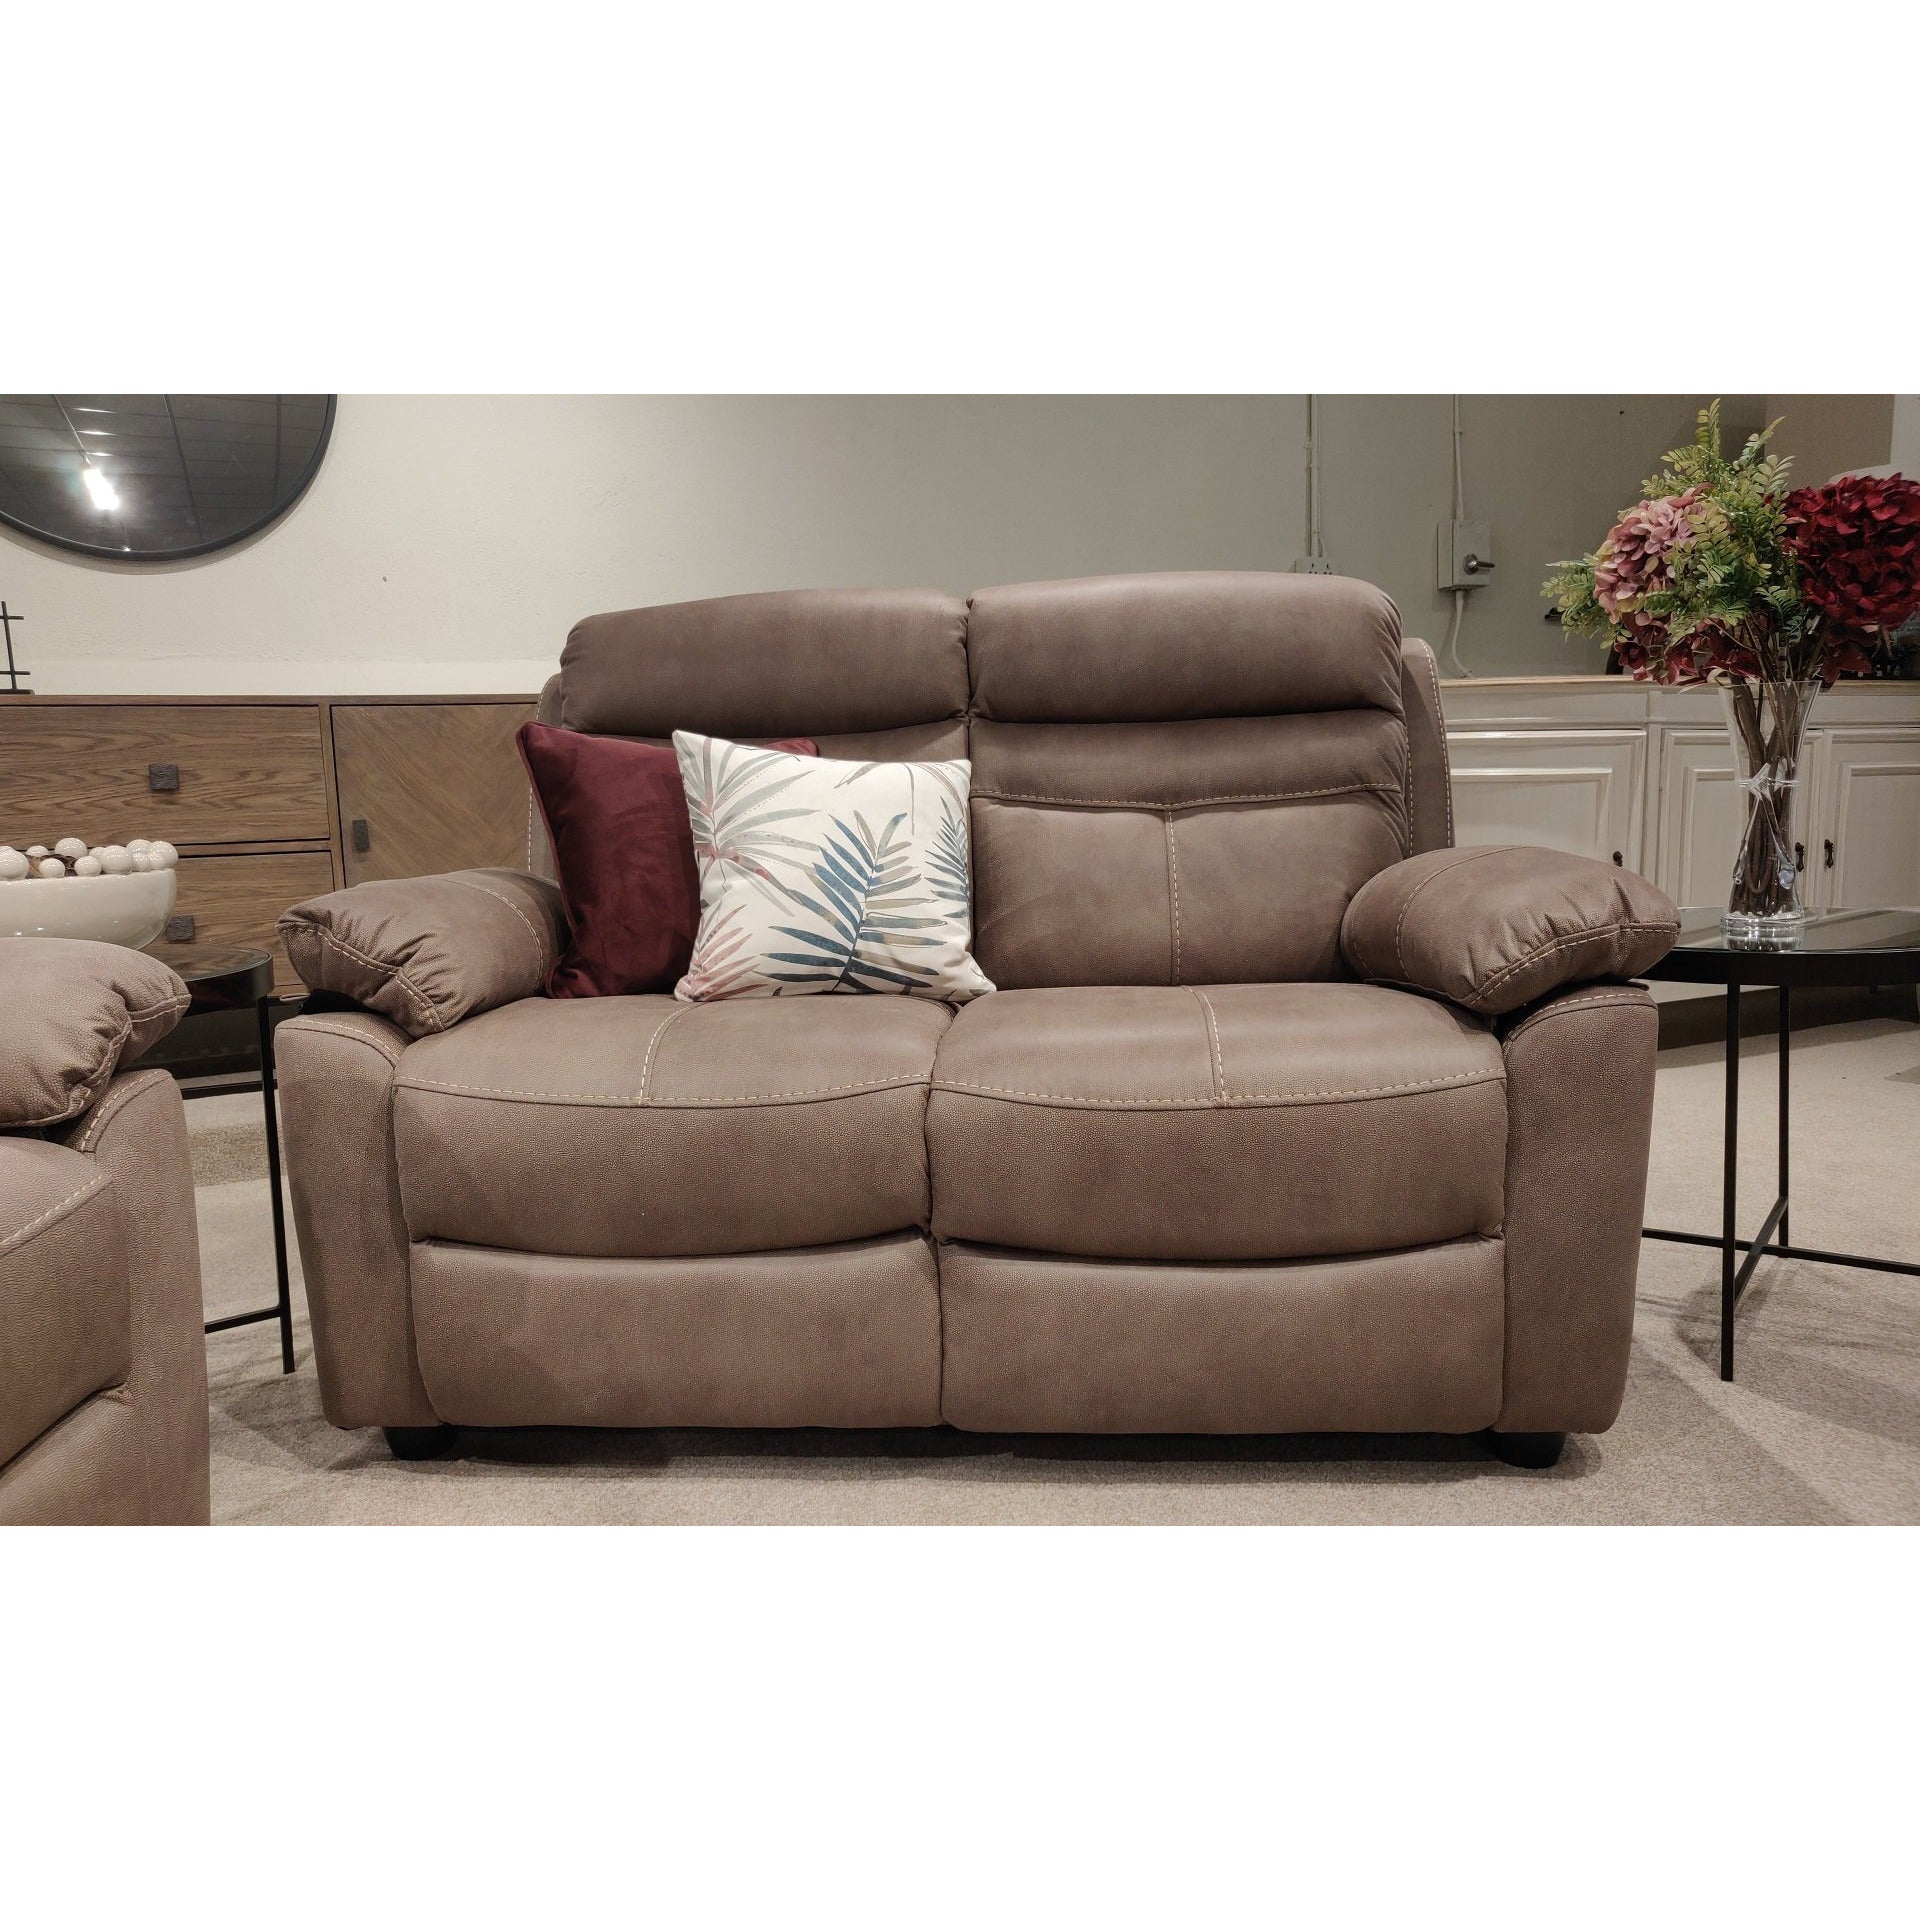 Lucy 2 Seater Sofa Pecan from Upstairs Downstairs Furniture in Lisburn, Monaghan and Enniskillen